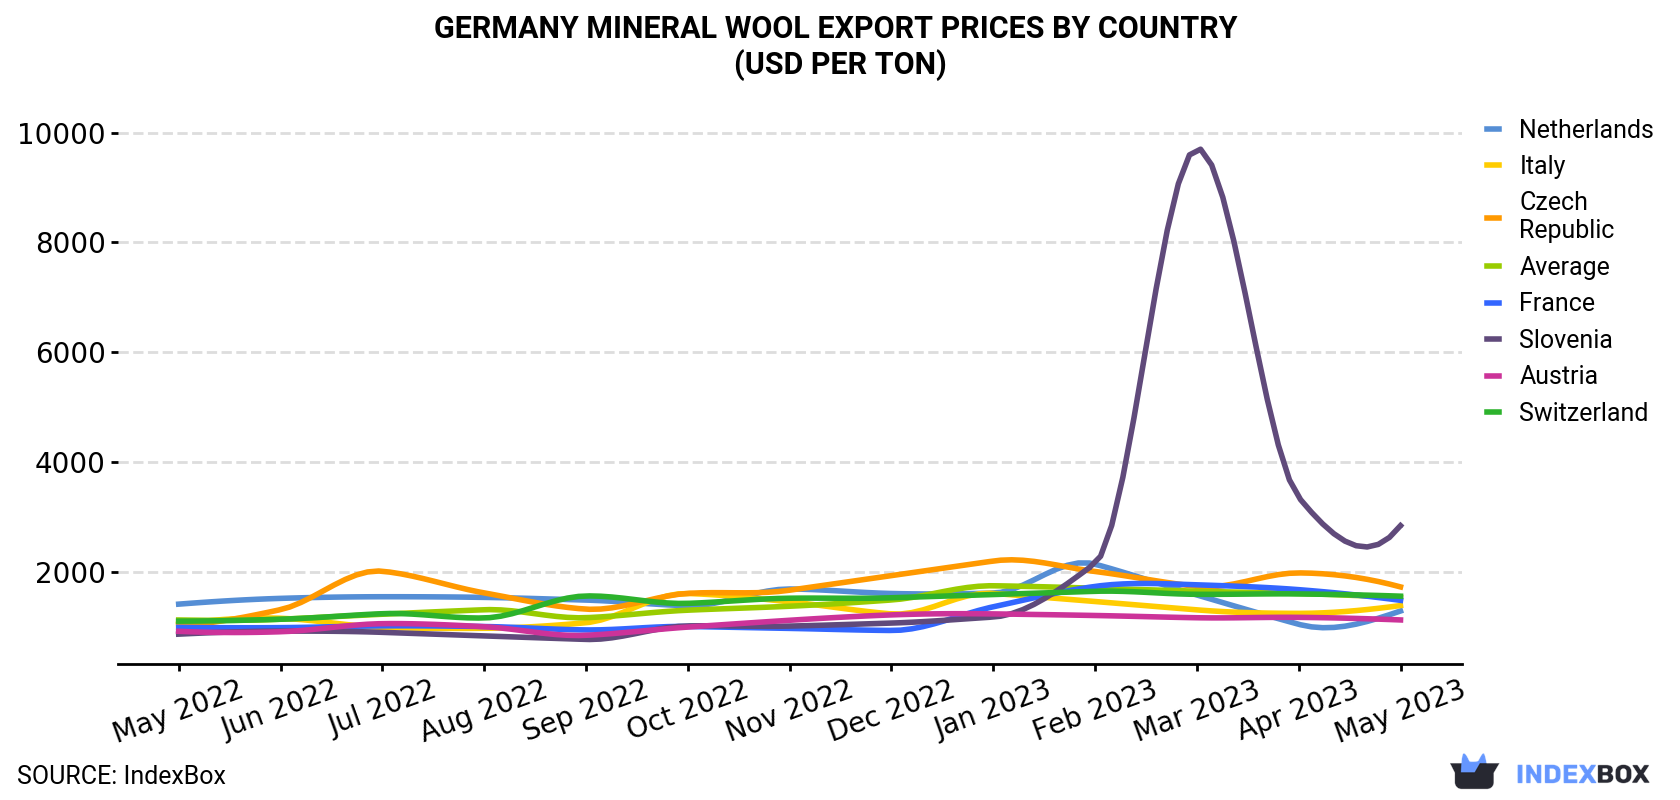 Germany Mineral Wool Export Prices By Country (USD Per Ton)